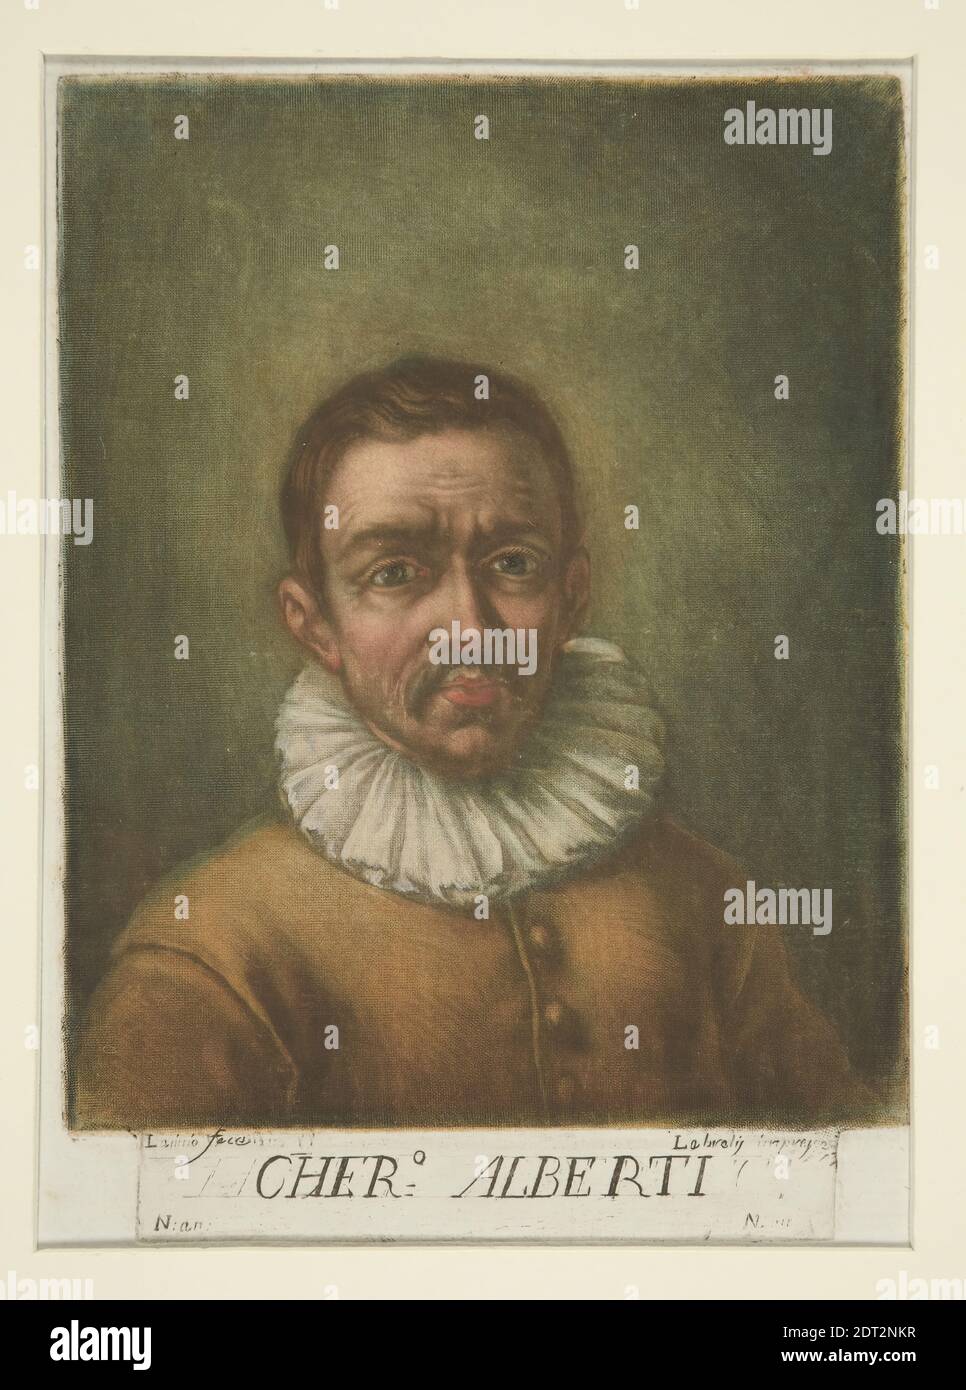 Engraver: Carlo Lasinio, Italian, 1759–1838, After: Cherubino Alberti, Italian, 1553–1615, Cherubino Alberti, from Ritratti di pittori (Portraits of Painters), ca. 1789, Color mezzotint, from 4 plates, touched by the artist (ca. 1789), platemark: 17.1 × 12.6 cm (6 3/4 × 4 15/16 in.), Made in Italy, Italian, 18th century, Works on Paper - Prints Stock Photo